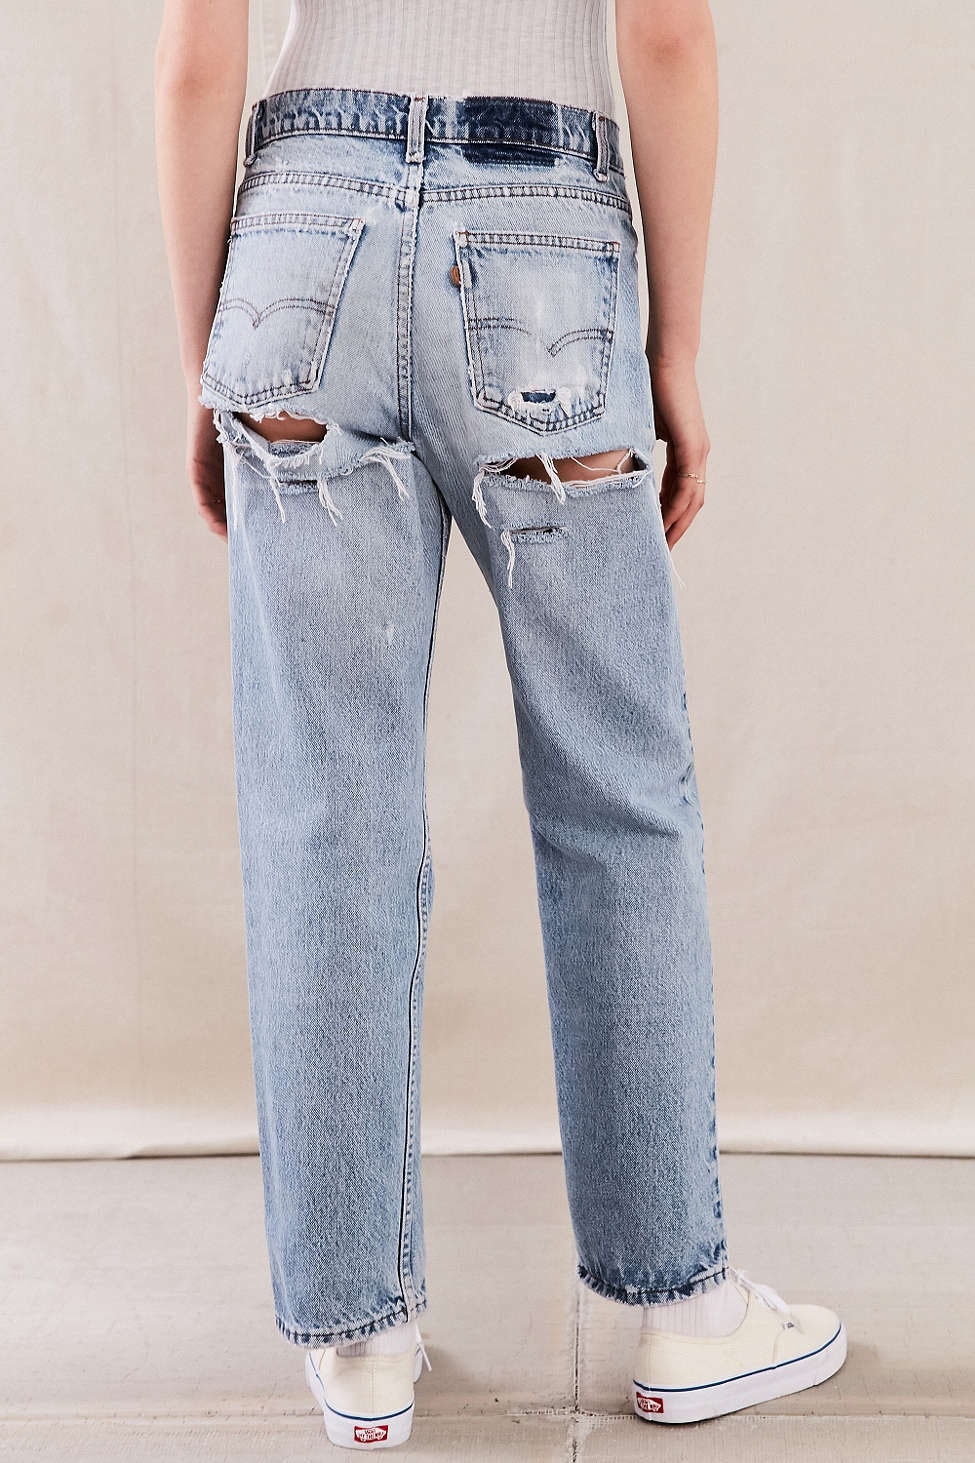 pants with hole in back